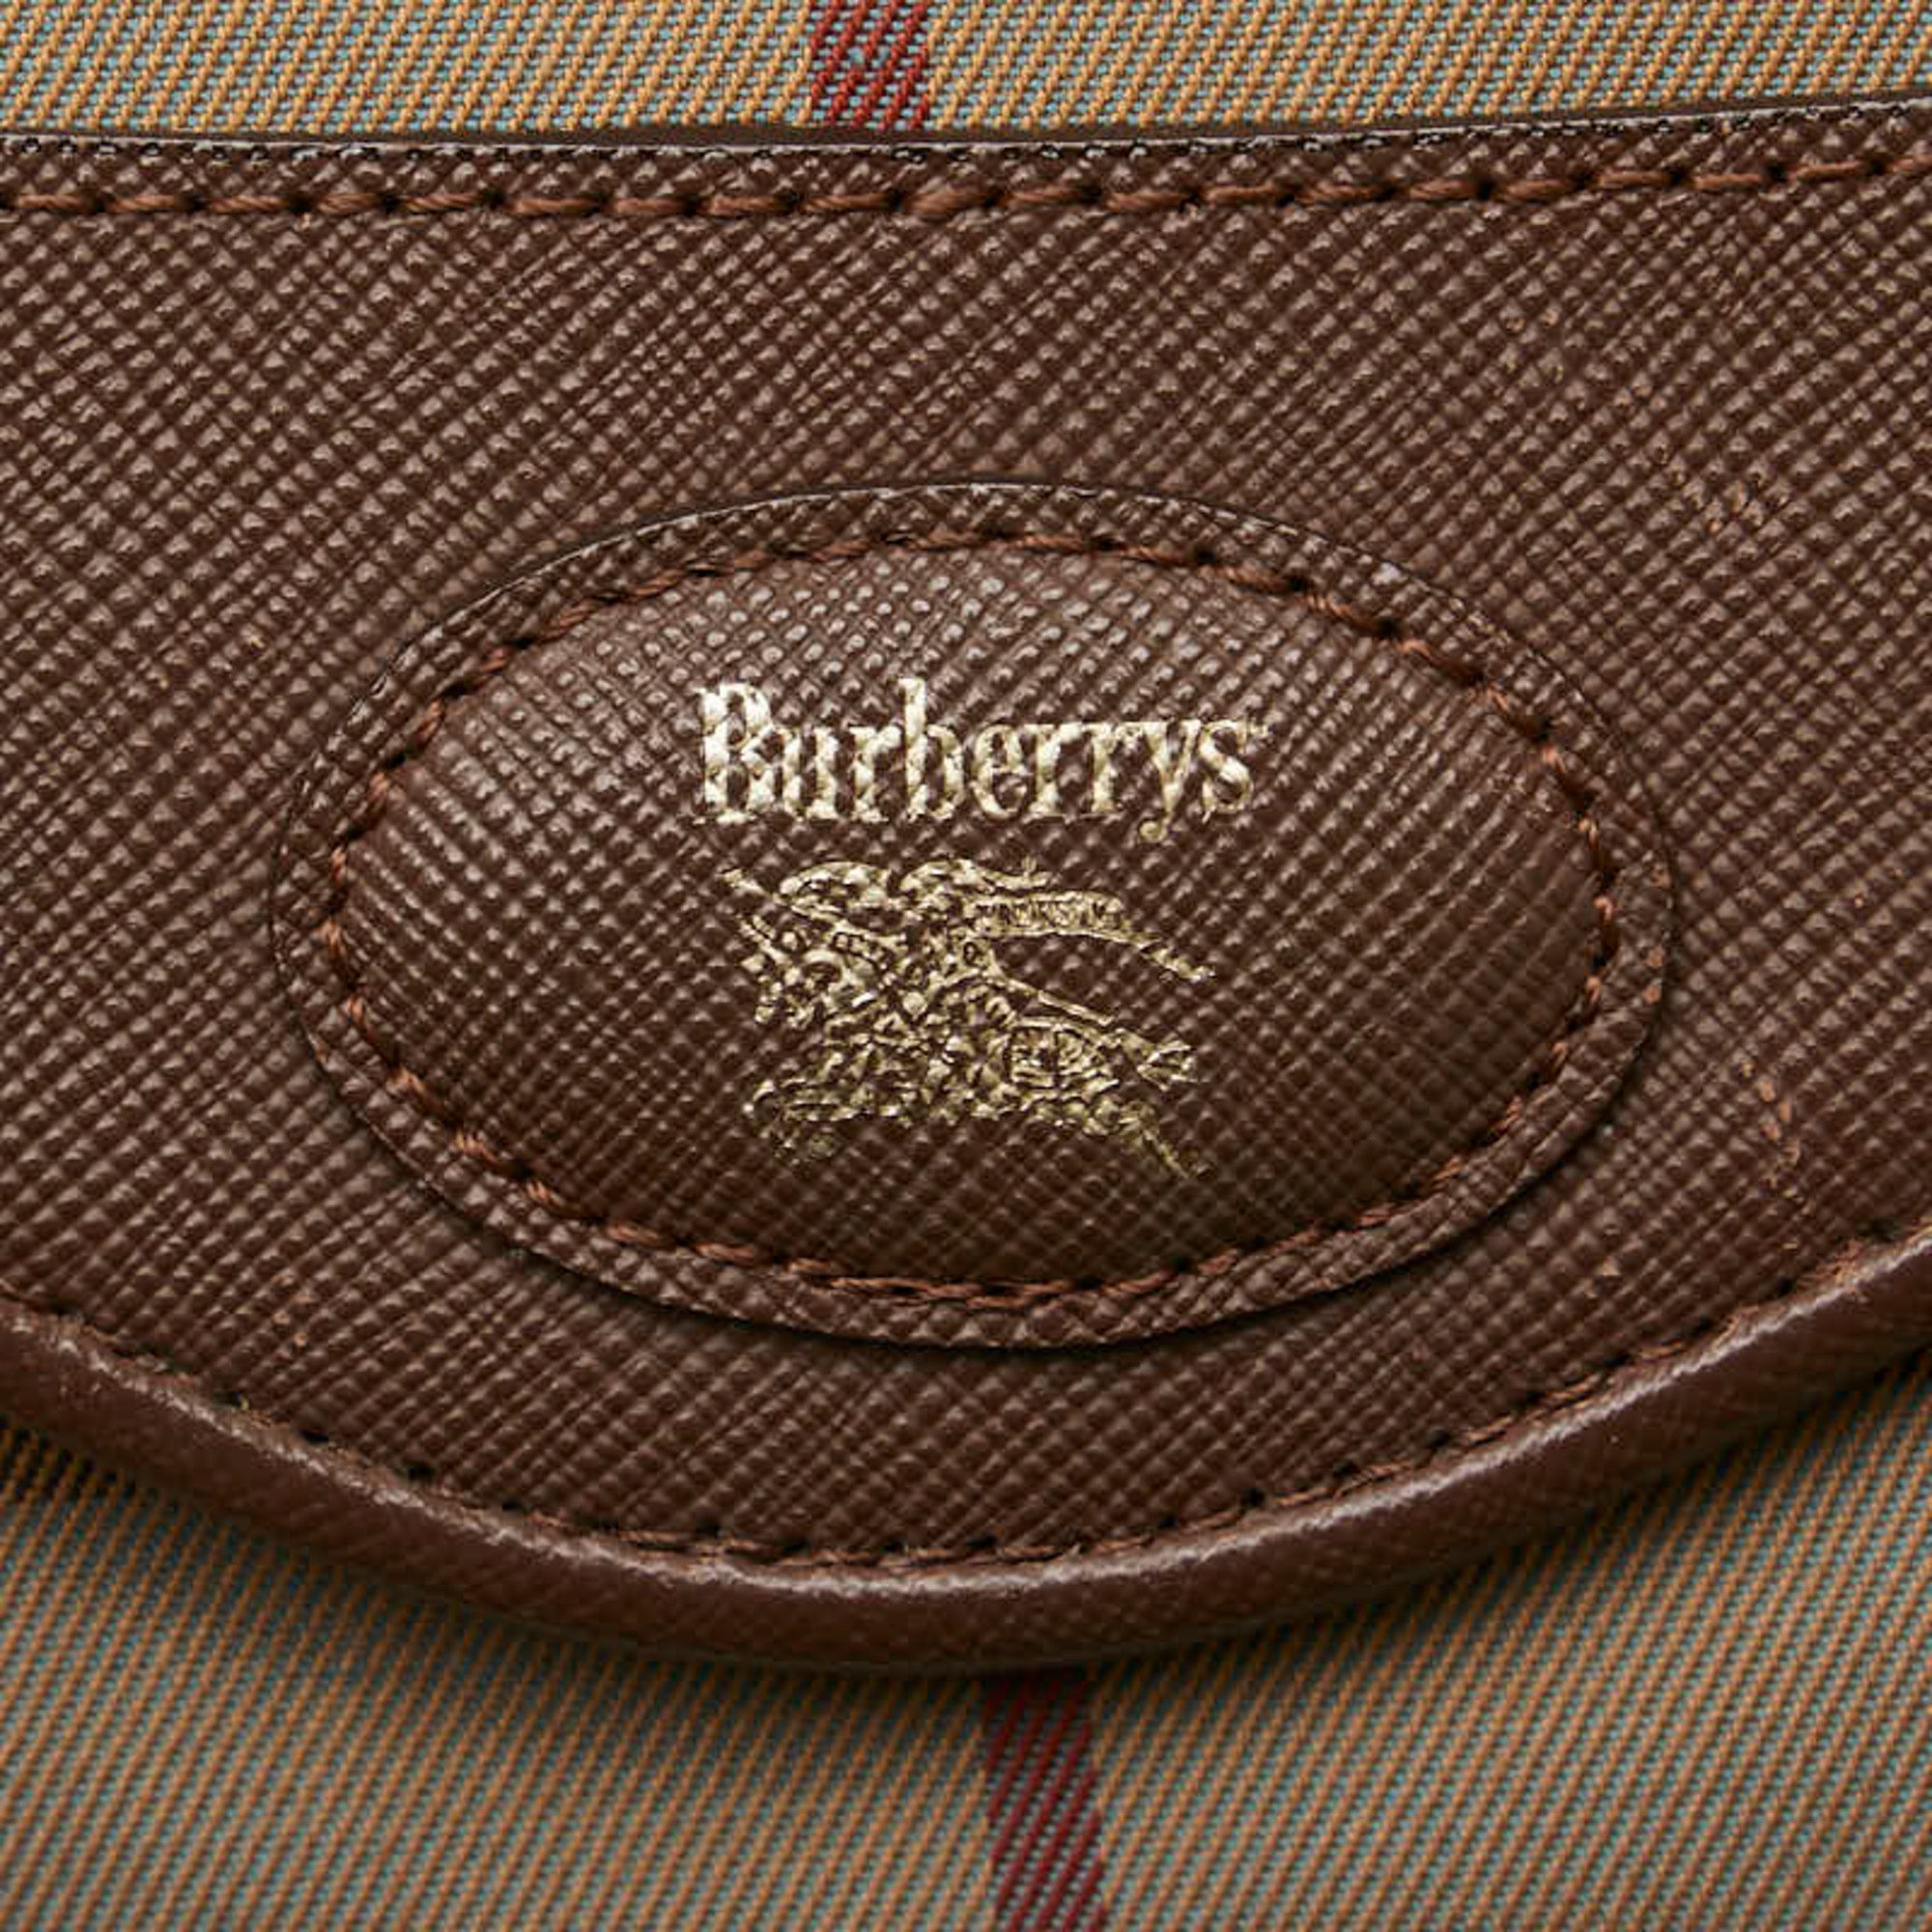 Burberry Check Jewel Beetle Shoulder Bag Brown Canvas Leather Women's BURBERRY